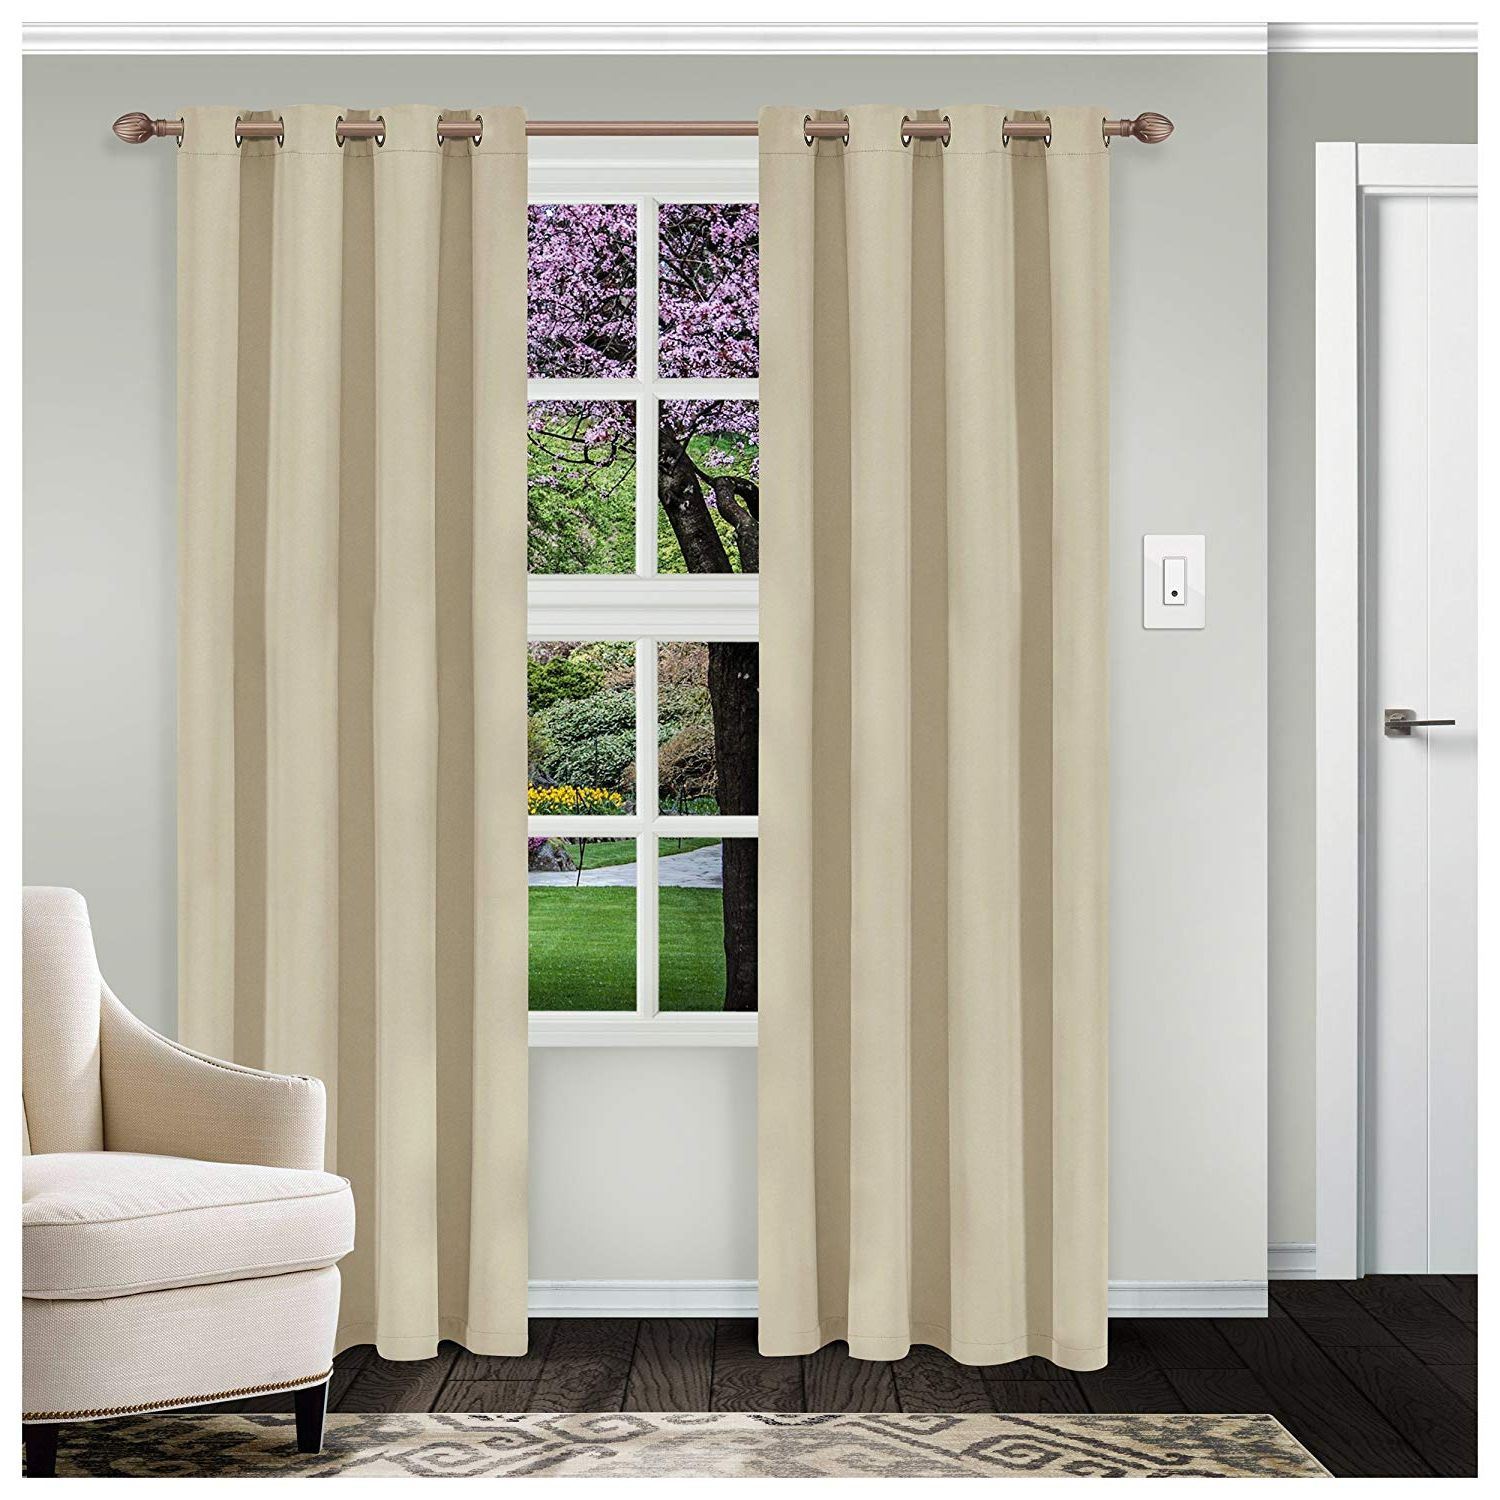 Buy Superior Solid Blackout Curtain Set Of 2, Thermal Intended For Most Recently Released Solid Thermal Insulated Blackout Curtain Panel Pairs (View 5 of 20)